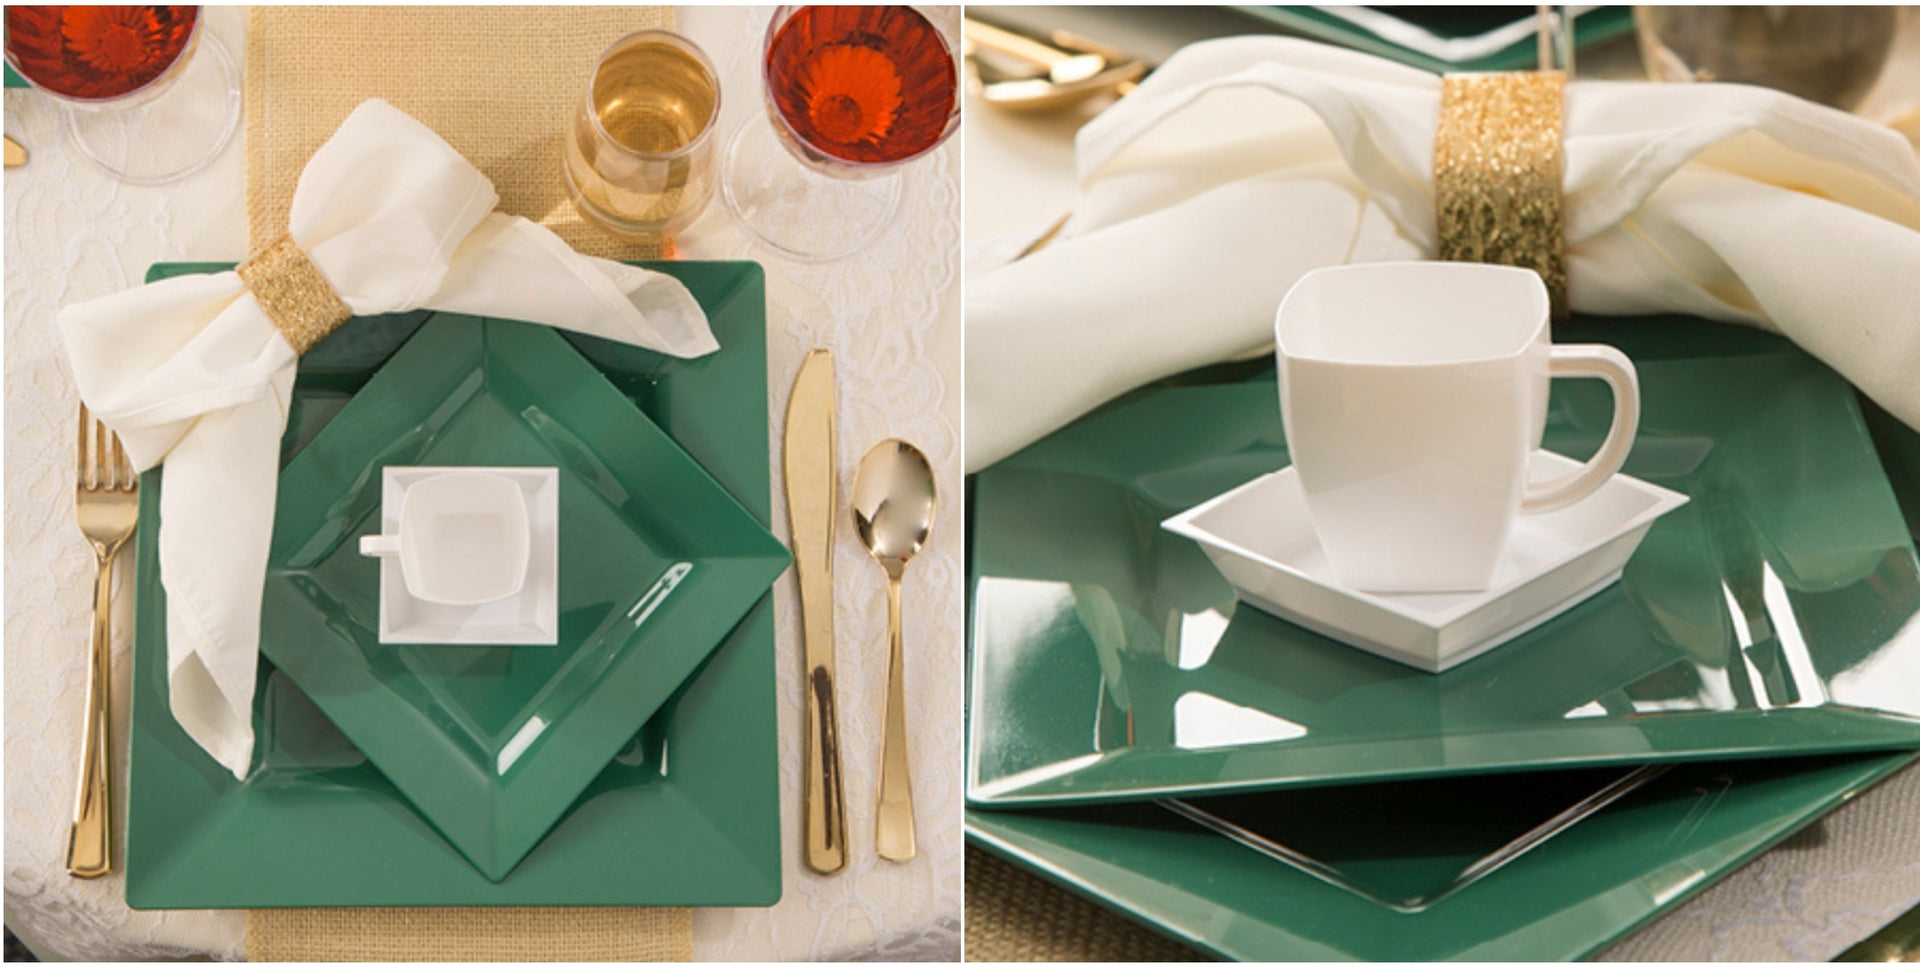 Stylish Shamrocks: How to Design a Luxurious St. Patrick's Day Table